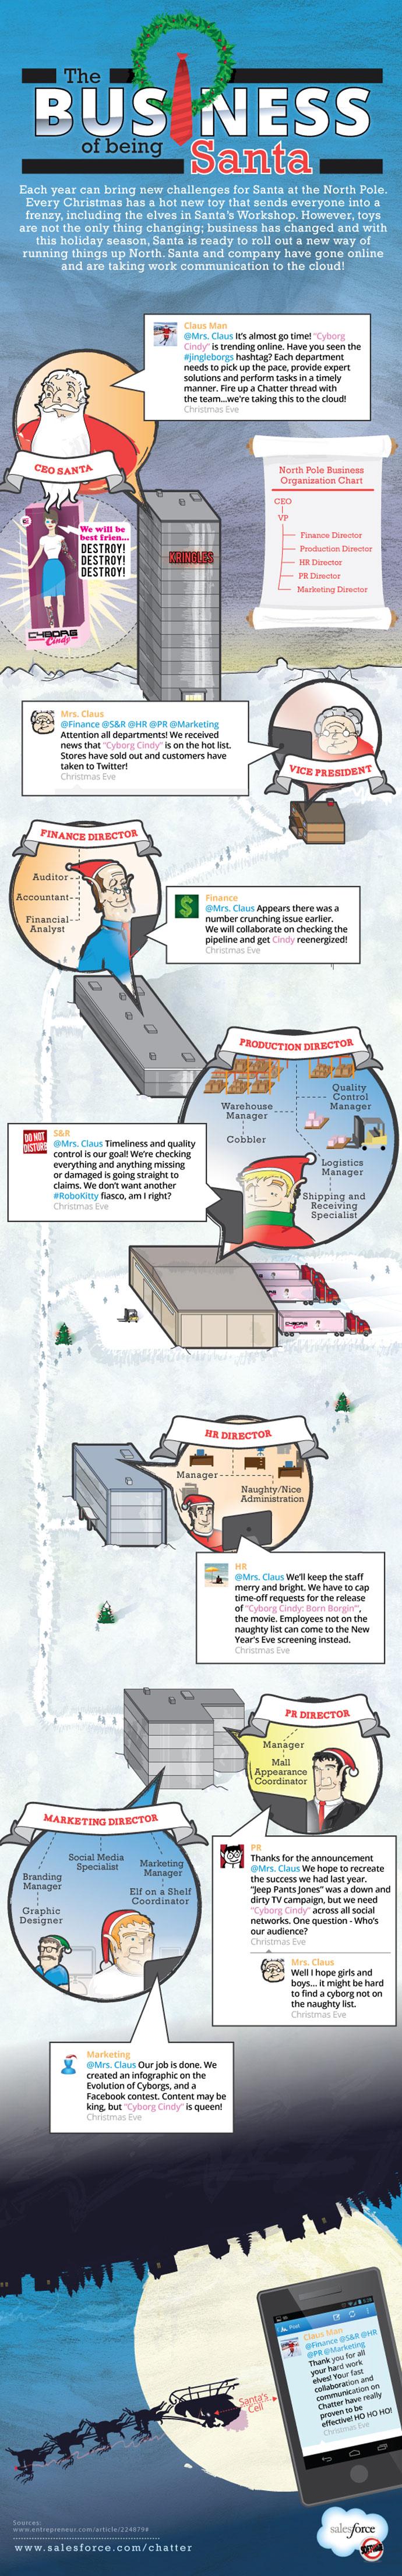 How Santa Is Taking Work Communication To The Cloud Infographic